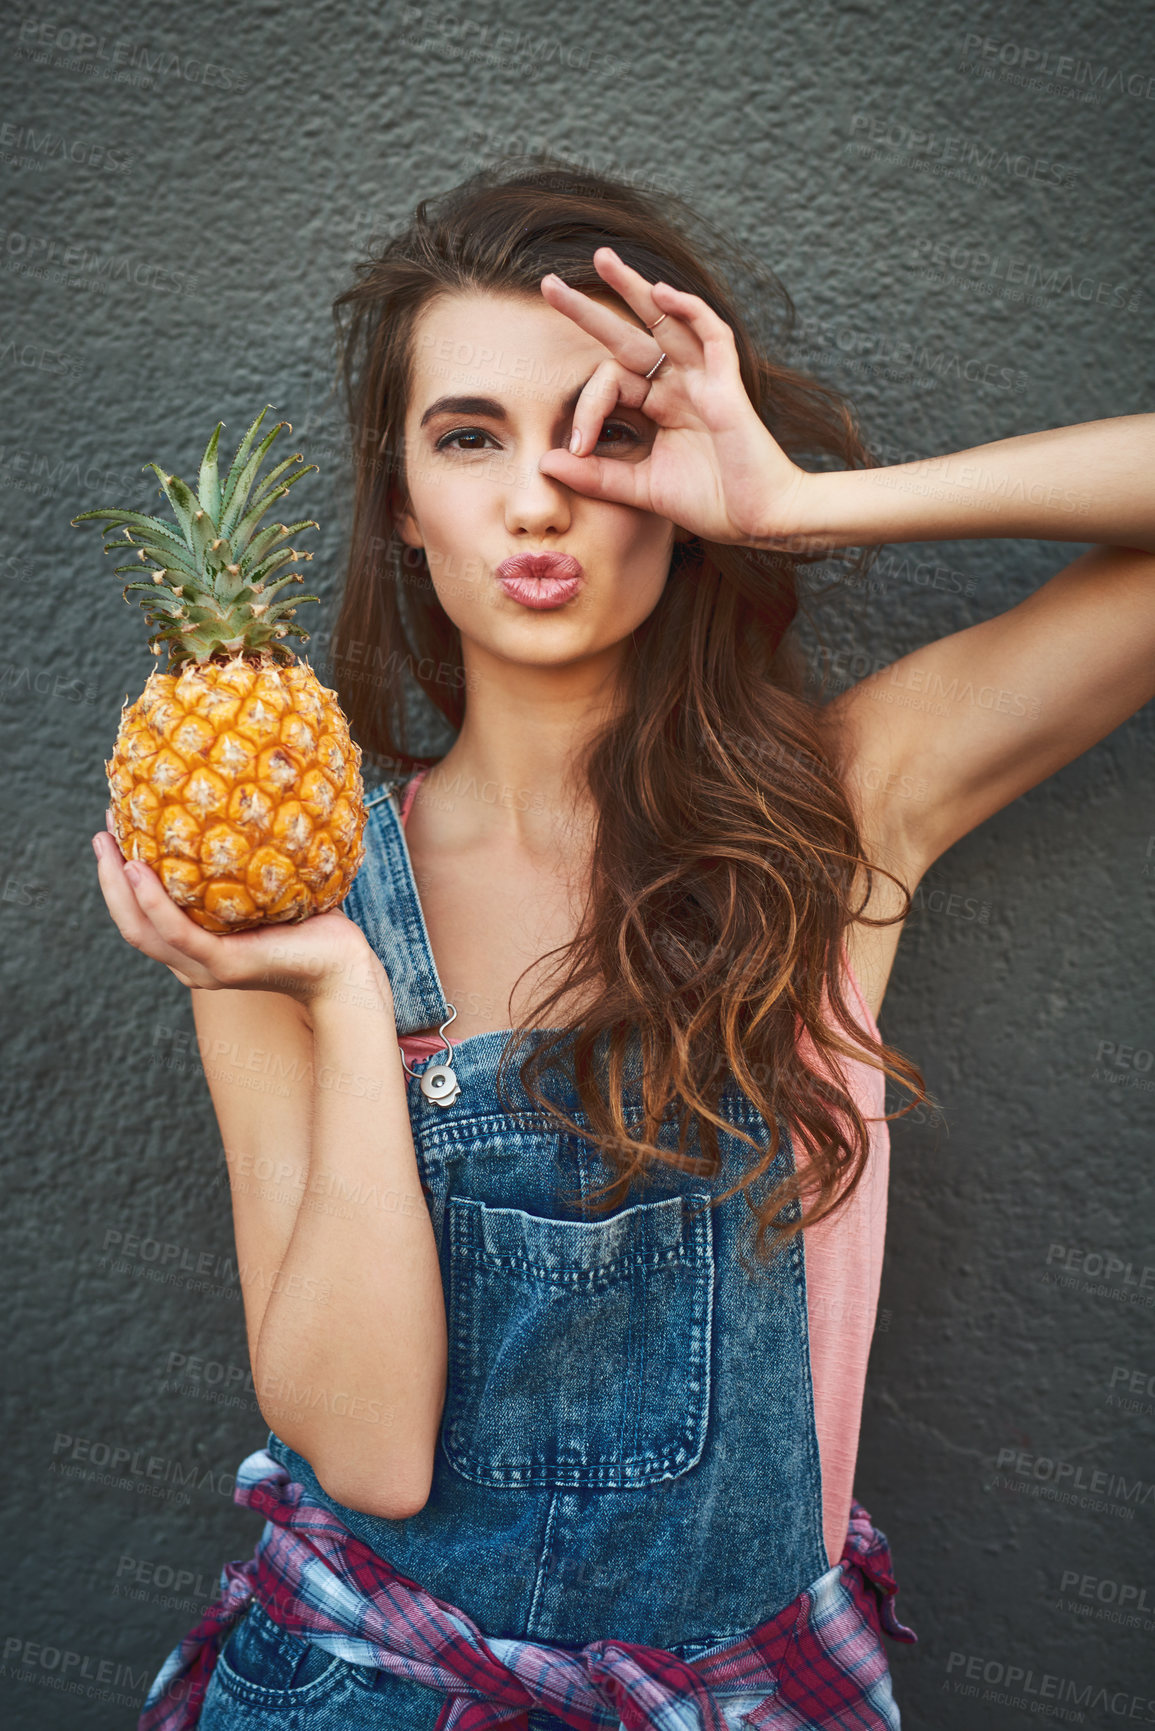 Buy stock photo Portrait of a carefree young woman showing a hand gesture on her face while holding a pineapple against a grey background